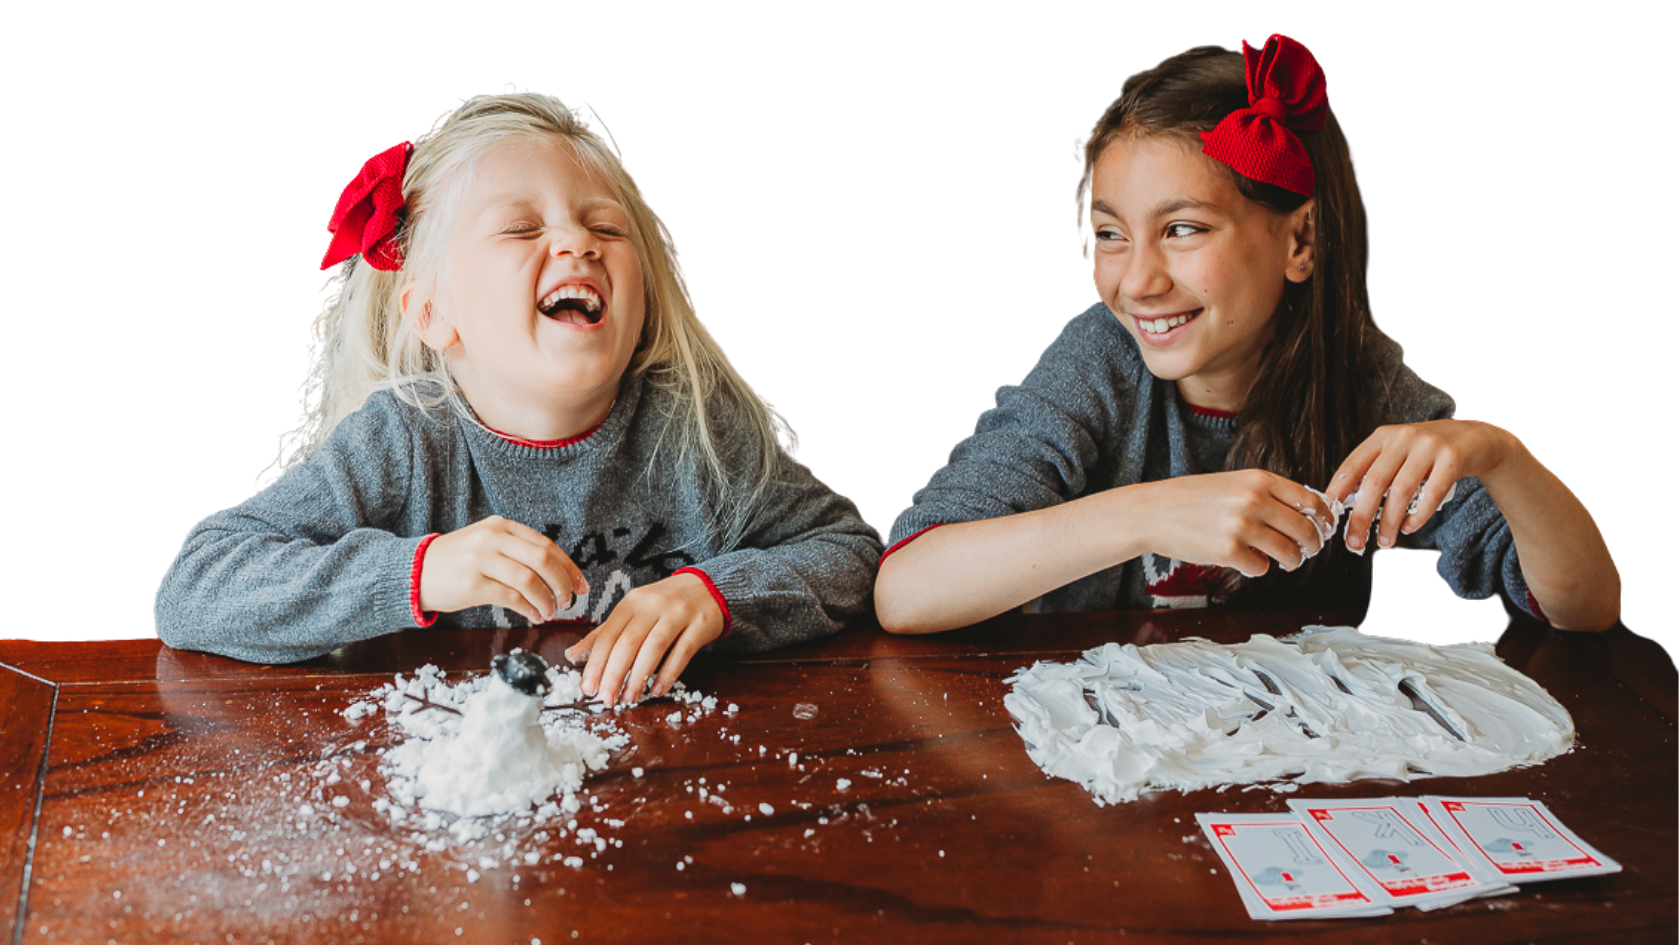 Preschool girl, head back, eyes clothed, laughing, playing with My Pre-K Box sensory snow, sister looking at her laughing, playing writing letters in sensory snow